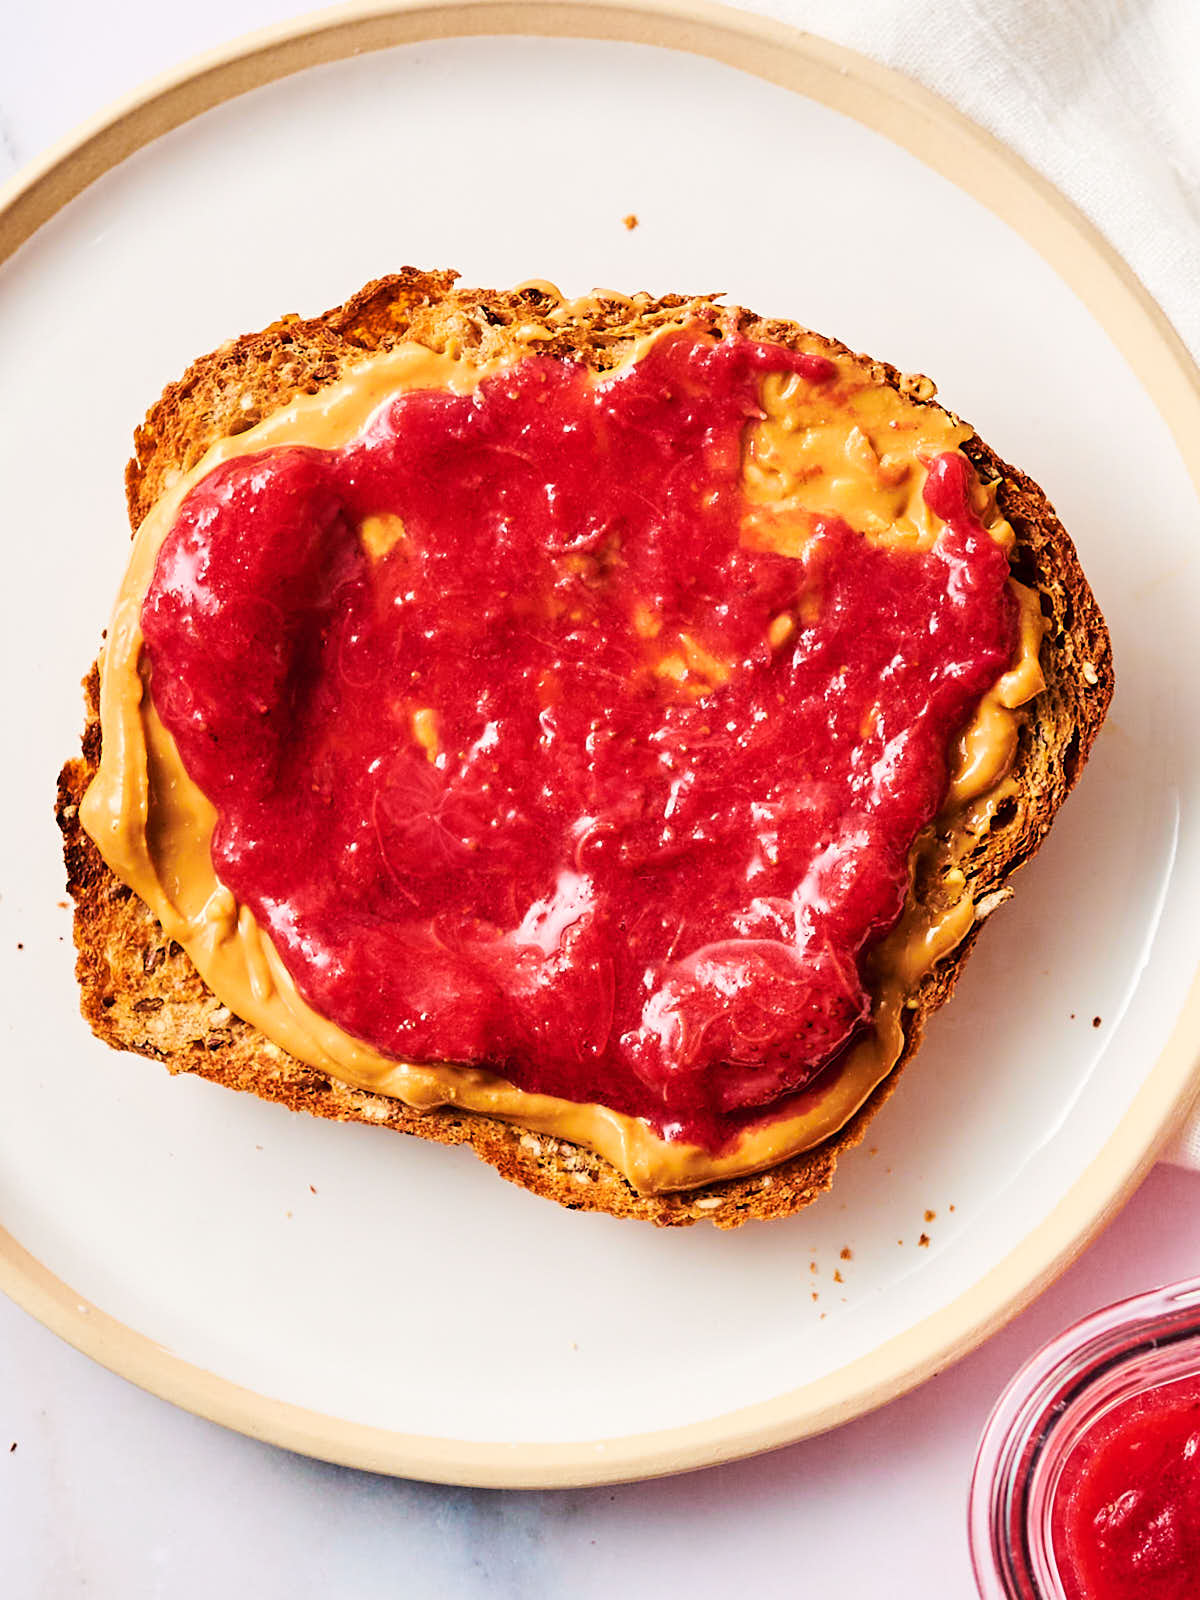 Toast topped with peanut butter and strawberry rhubarb spread.